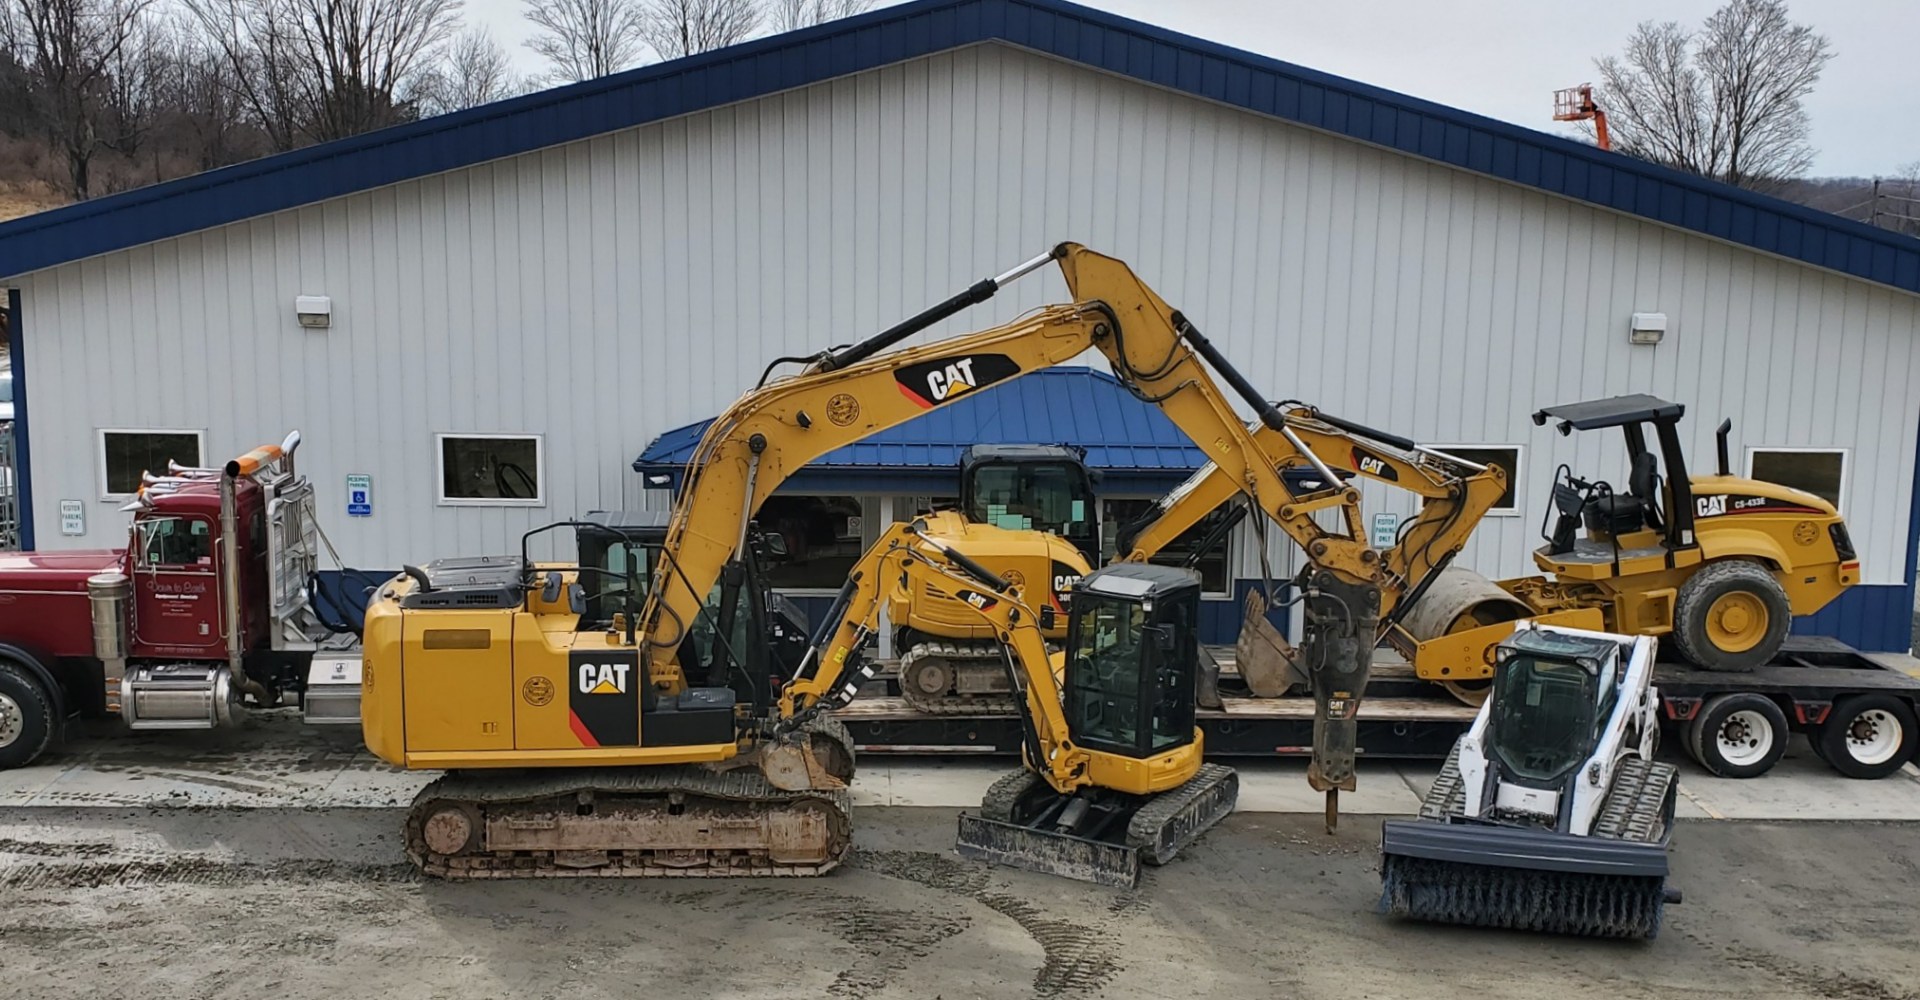 Construction Equipment & Tool Rentals in Scott Township and Montrose PA